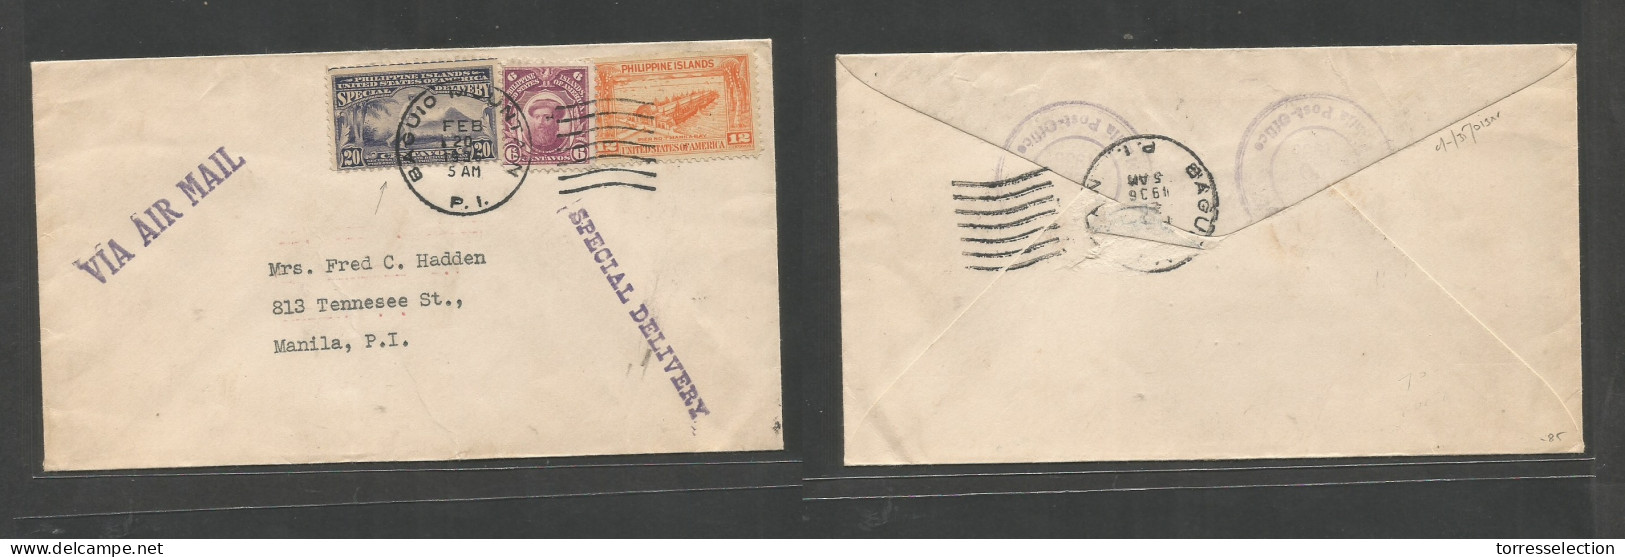 PHILIPPINES. 1936 (20 Febr) Baguio Mountain - Manila (20 Febr) Air Special Delivery Multifkd Env Incl Special 20c Lilac  - Philippines